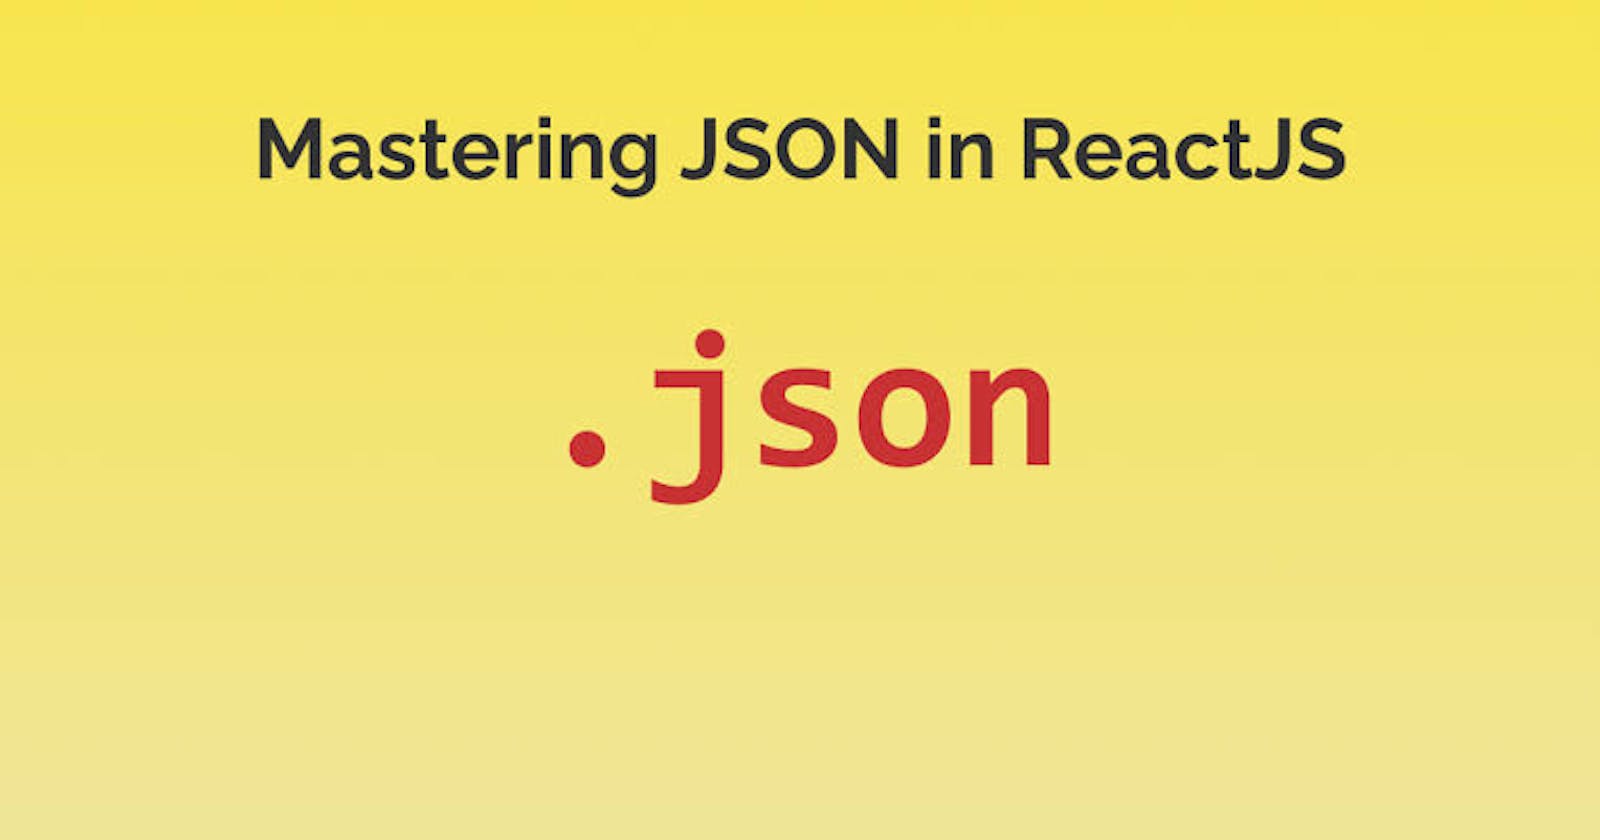 "Simplify Your Data Handling: Learn to Load JSON Files into React with UseEffect, UseState, and Fetch API"